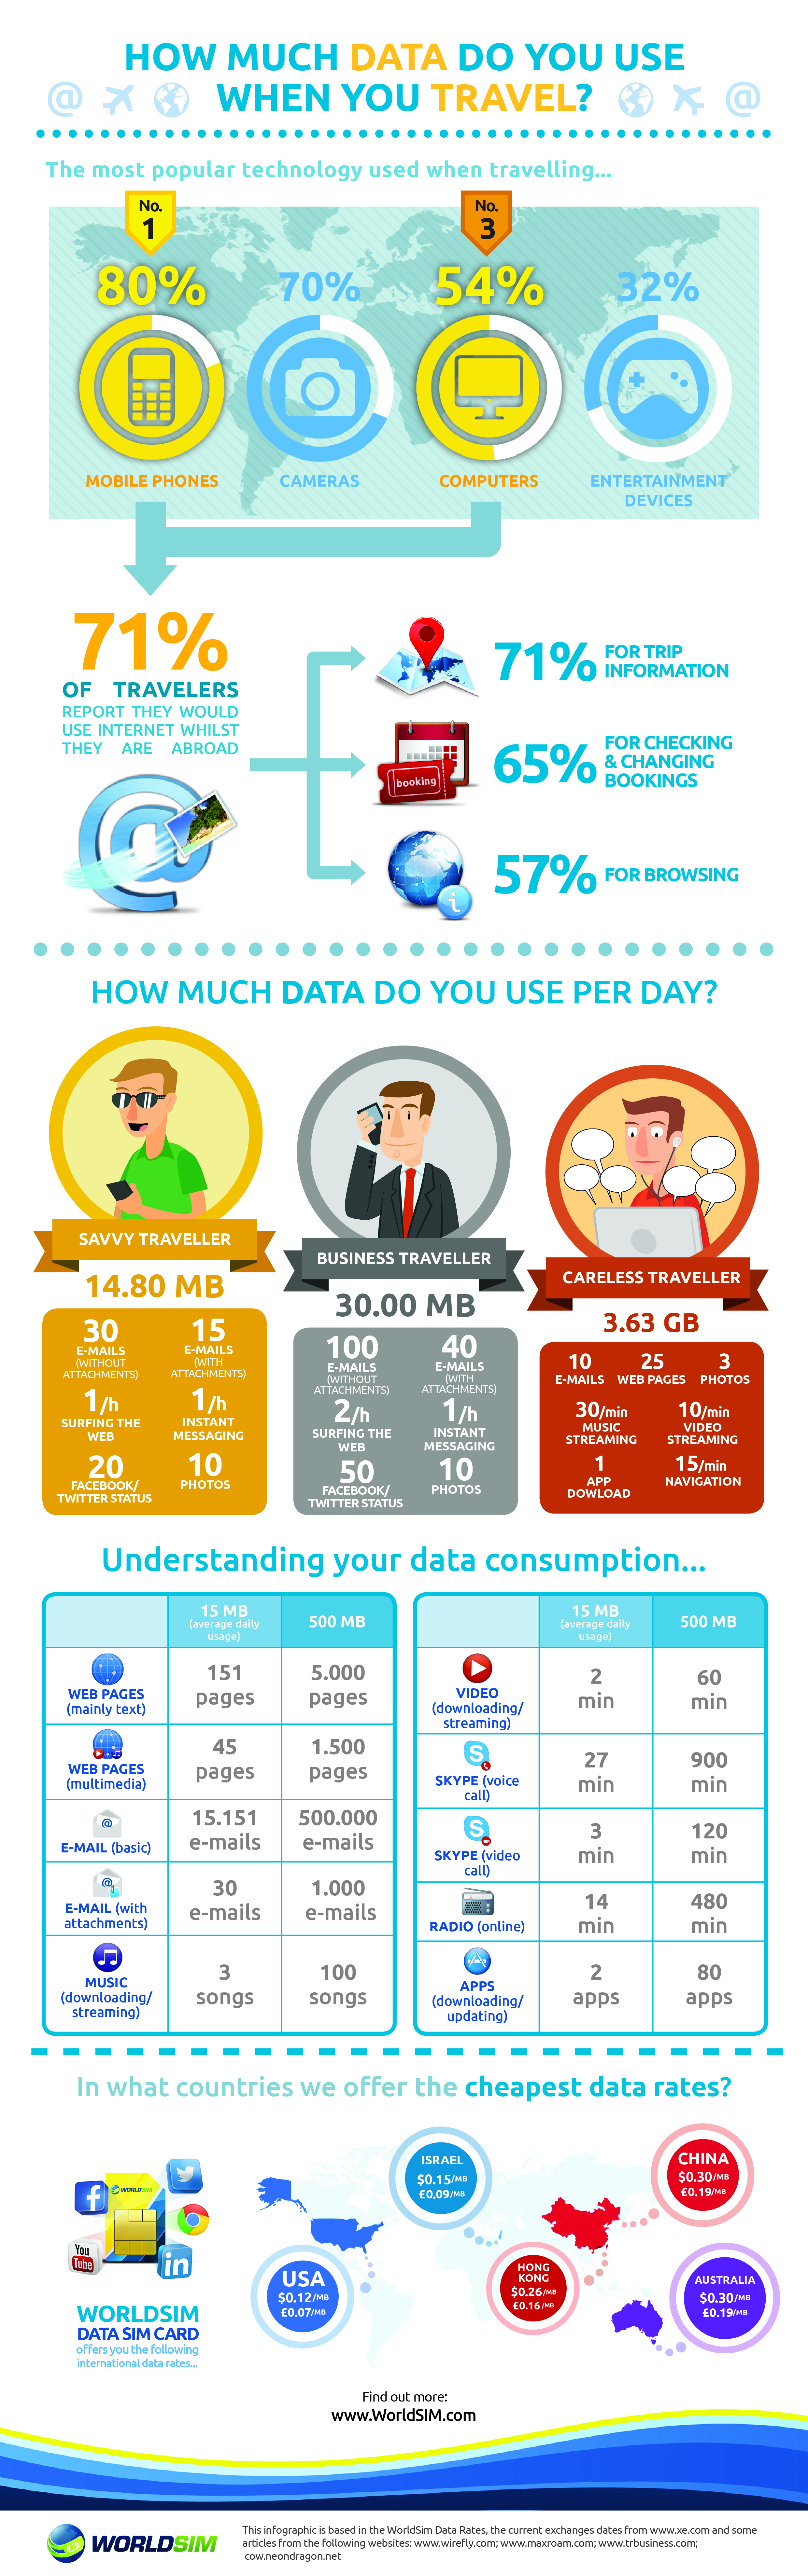 How much data do you use when you travel?